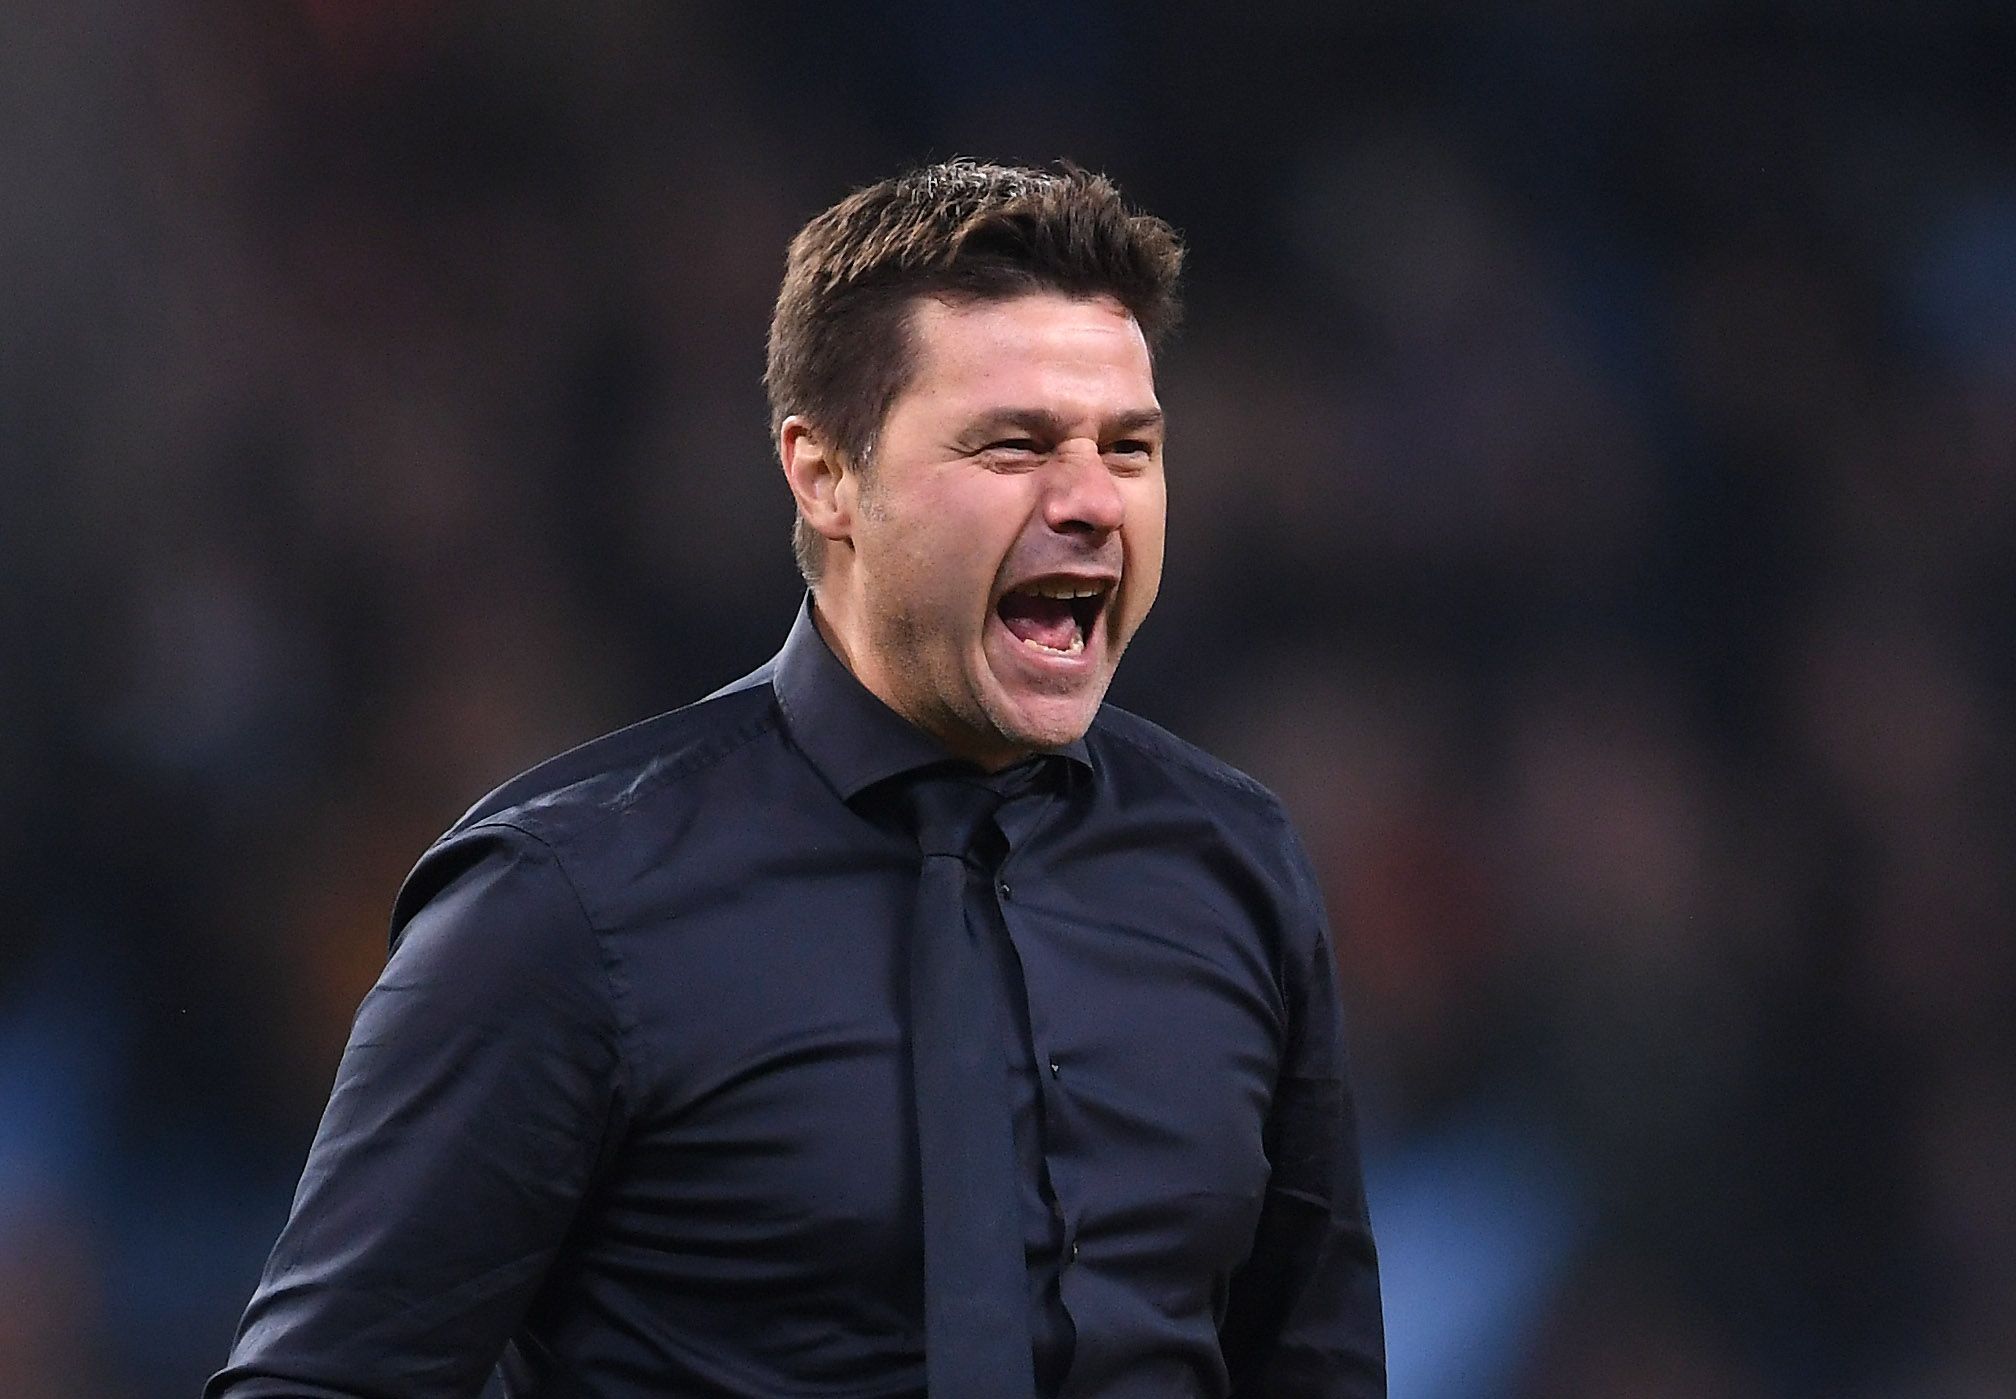 Will Pochettino become Chelsea's new manager?